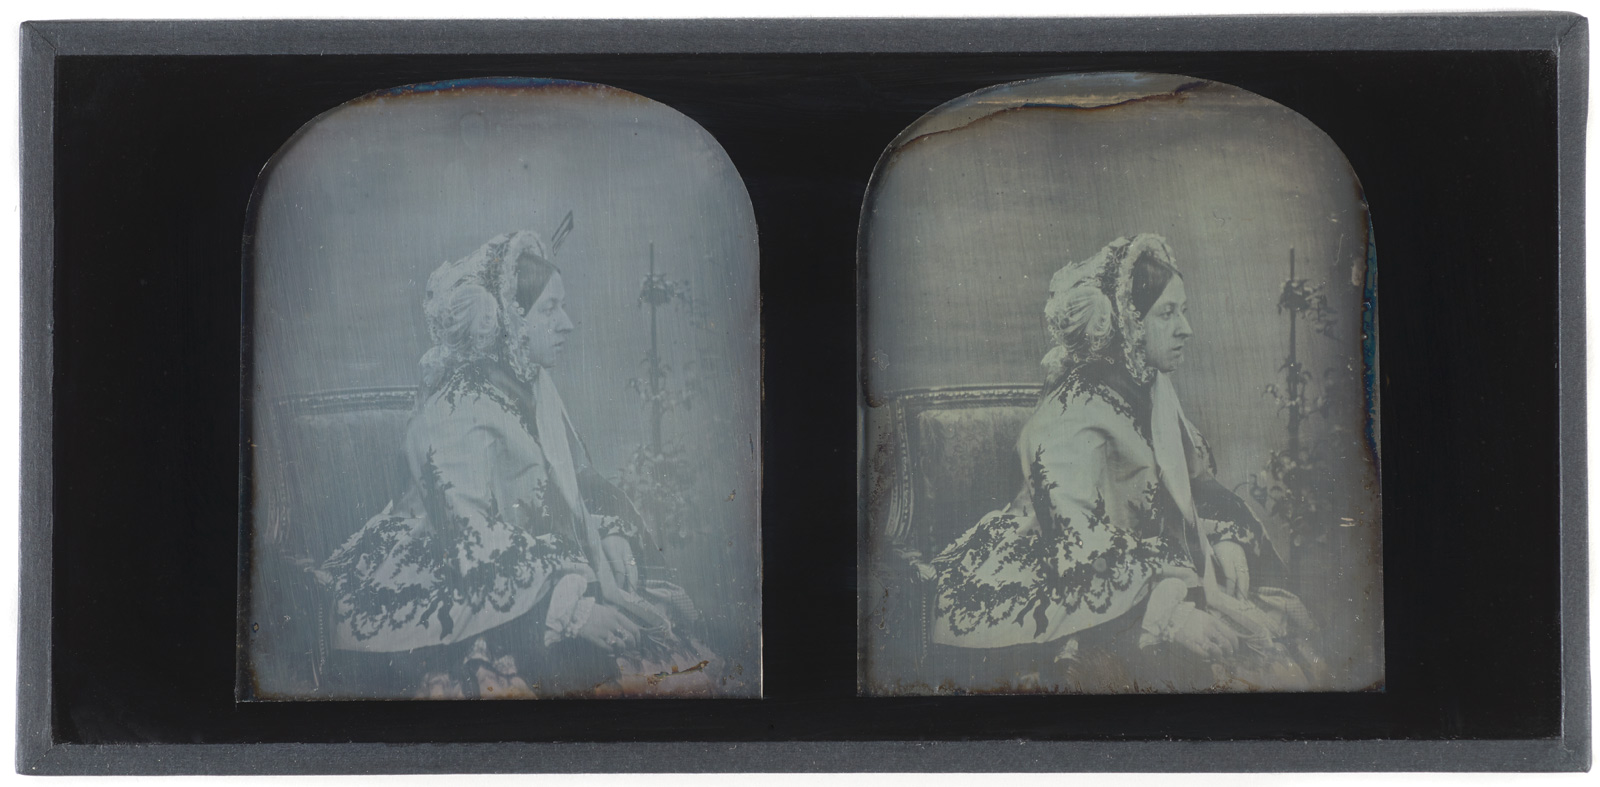 Hand-tinted stereoscopic daguerreotype of Queen Victoria, c. 1850, by Antoine Claudet.  Bookshaped, expanding case of dark blue leather. Decorated with gilt. Brass clasp. Opens to reveal two daguerreotypes and pair of binoculars. Case lined with purple velvet. Leather spine broken. One picture speckled with black.